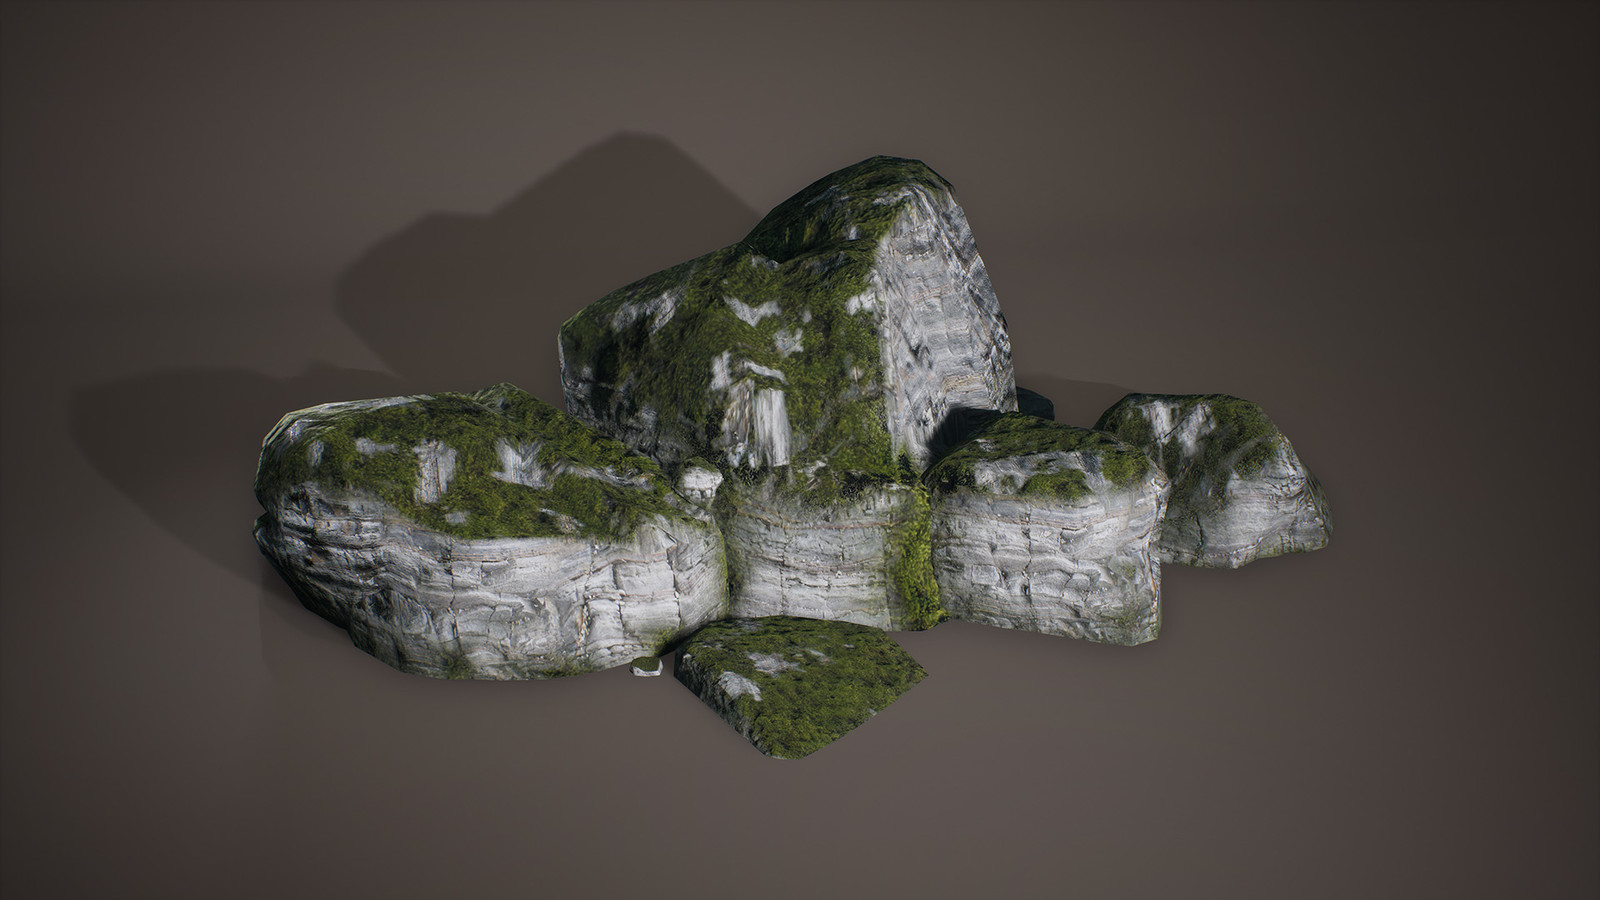 The rocks are used mainly as filler, therefore they have no custom textures or a detailed geometry.